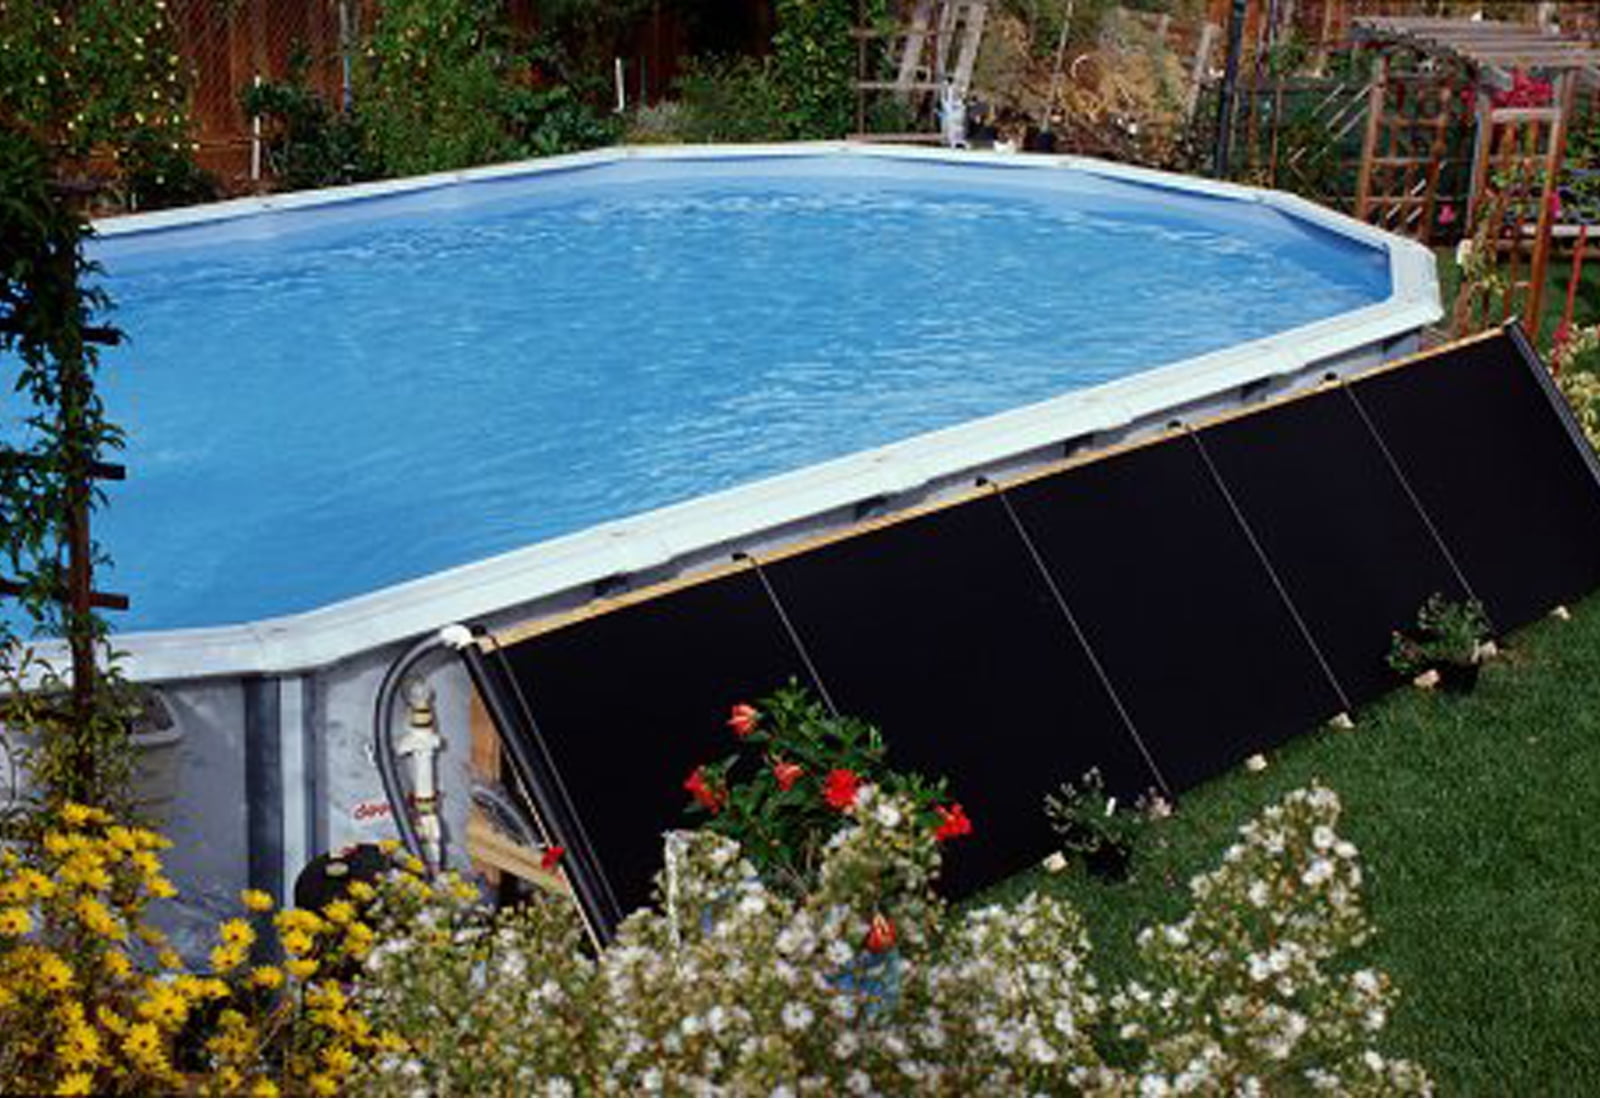 fafco-2-2-x20-above-ground-swimming-pool-solar-heating-system-290-2